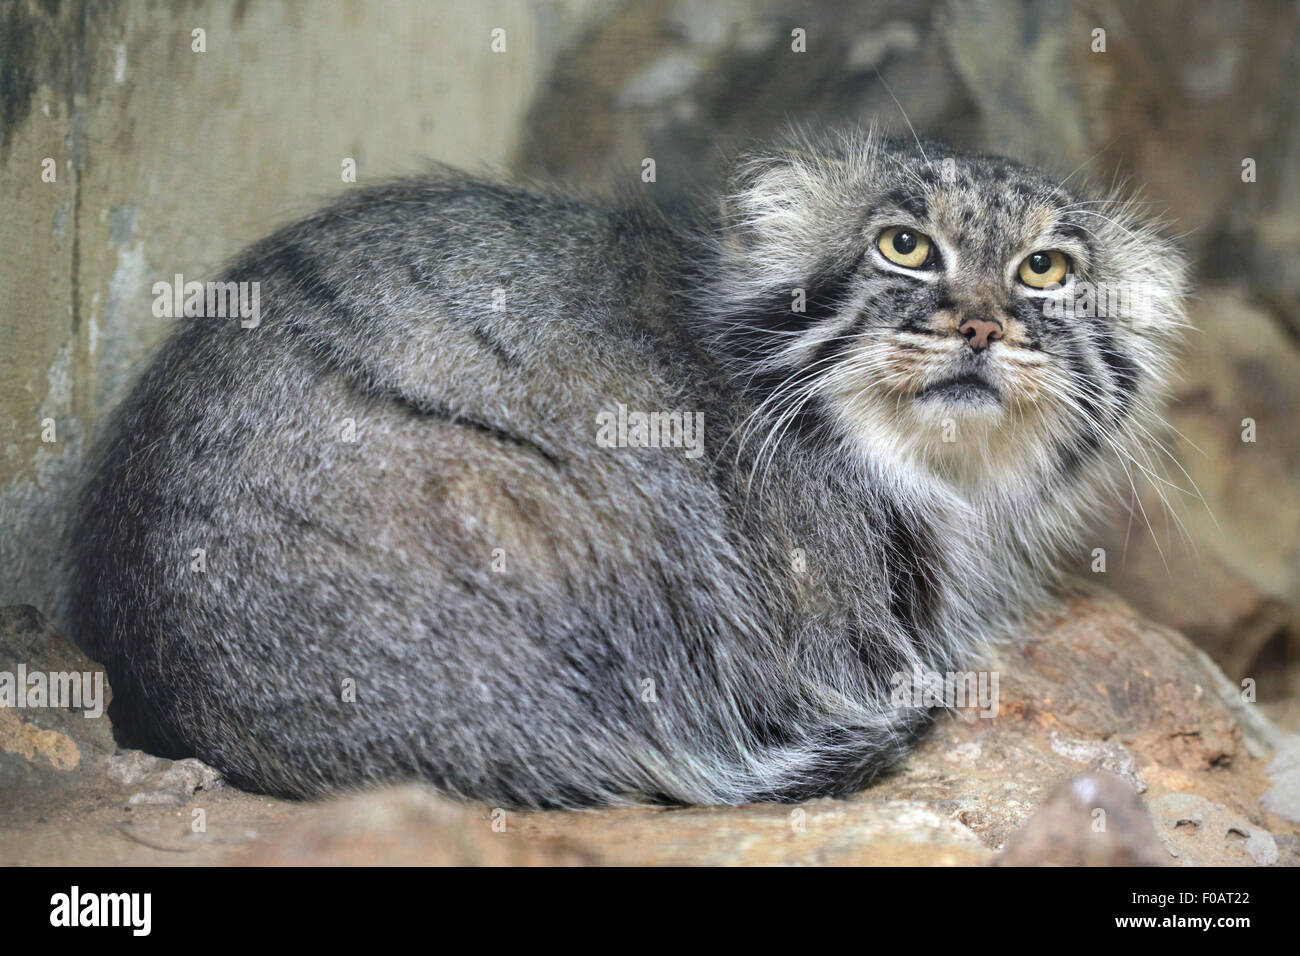 Pallas's cat (Otocolobus manul), also known as the manul at Chomutov Zoo in Chomutov, North Bohemia, Czech Republic. Stock Photo